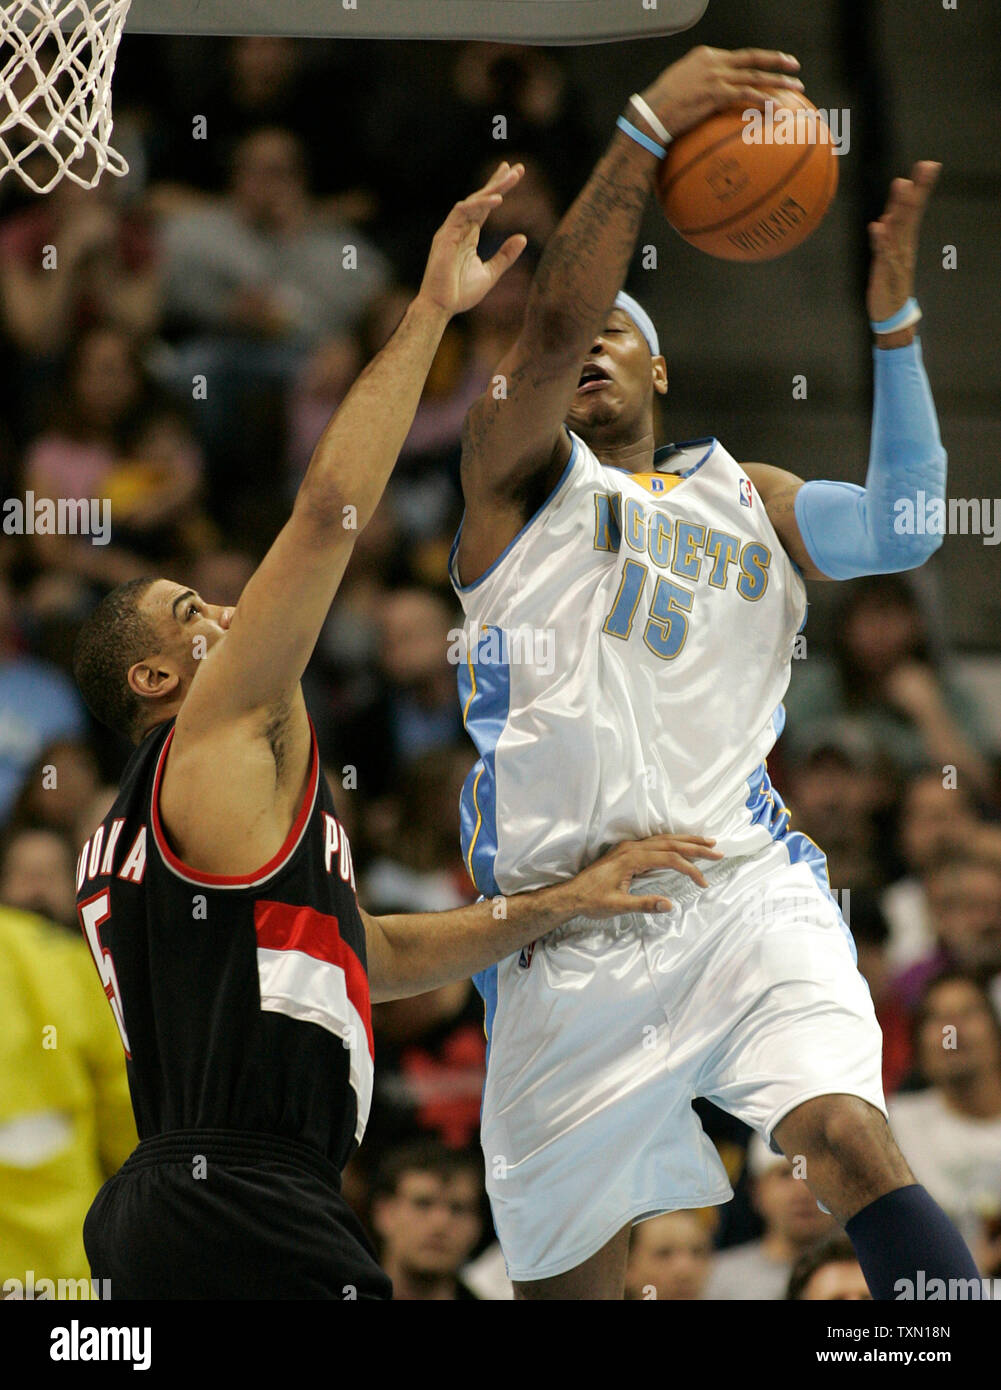 Denver Nuggets forward Carmelo Anthony (R) draws a foul from Portland Trail Blazers forward Ime Udoka in the second quarter at the Pepsi Center in Denver on March 13, 2007.  (UPI Photo/Gary C. Caskey) Stock Photo